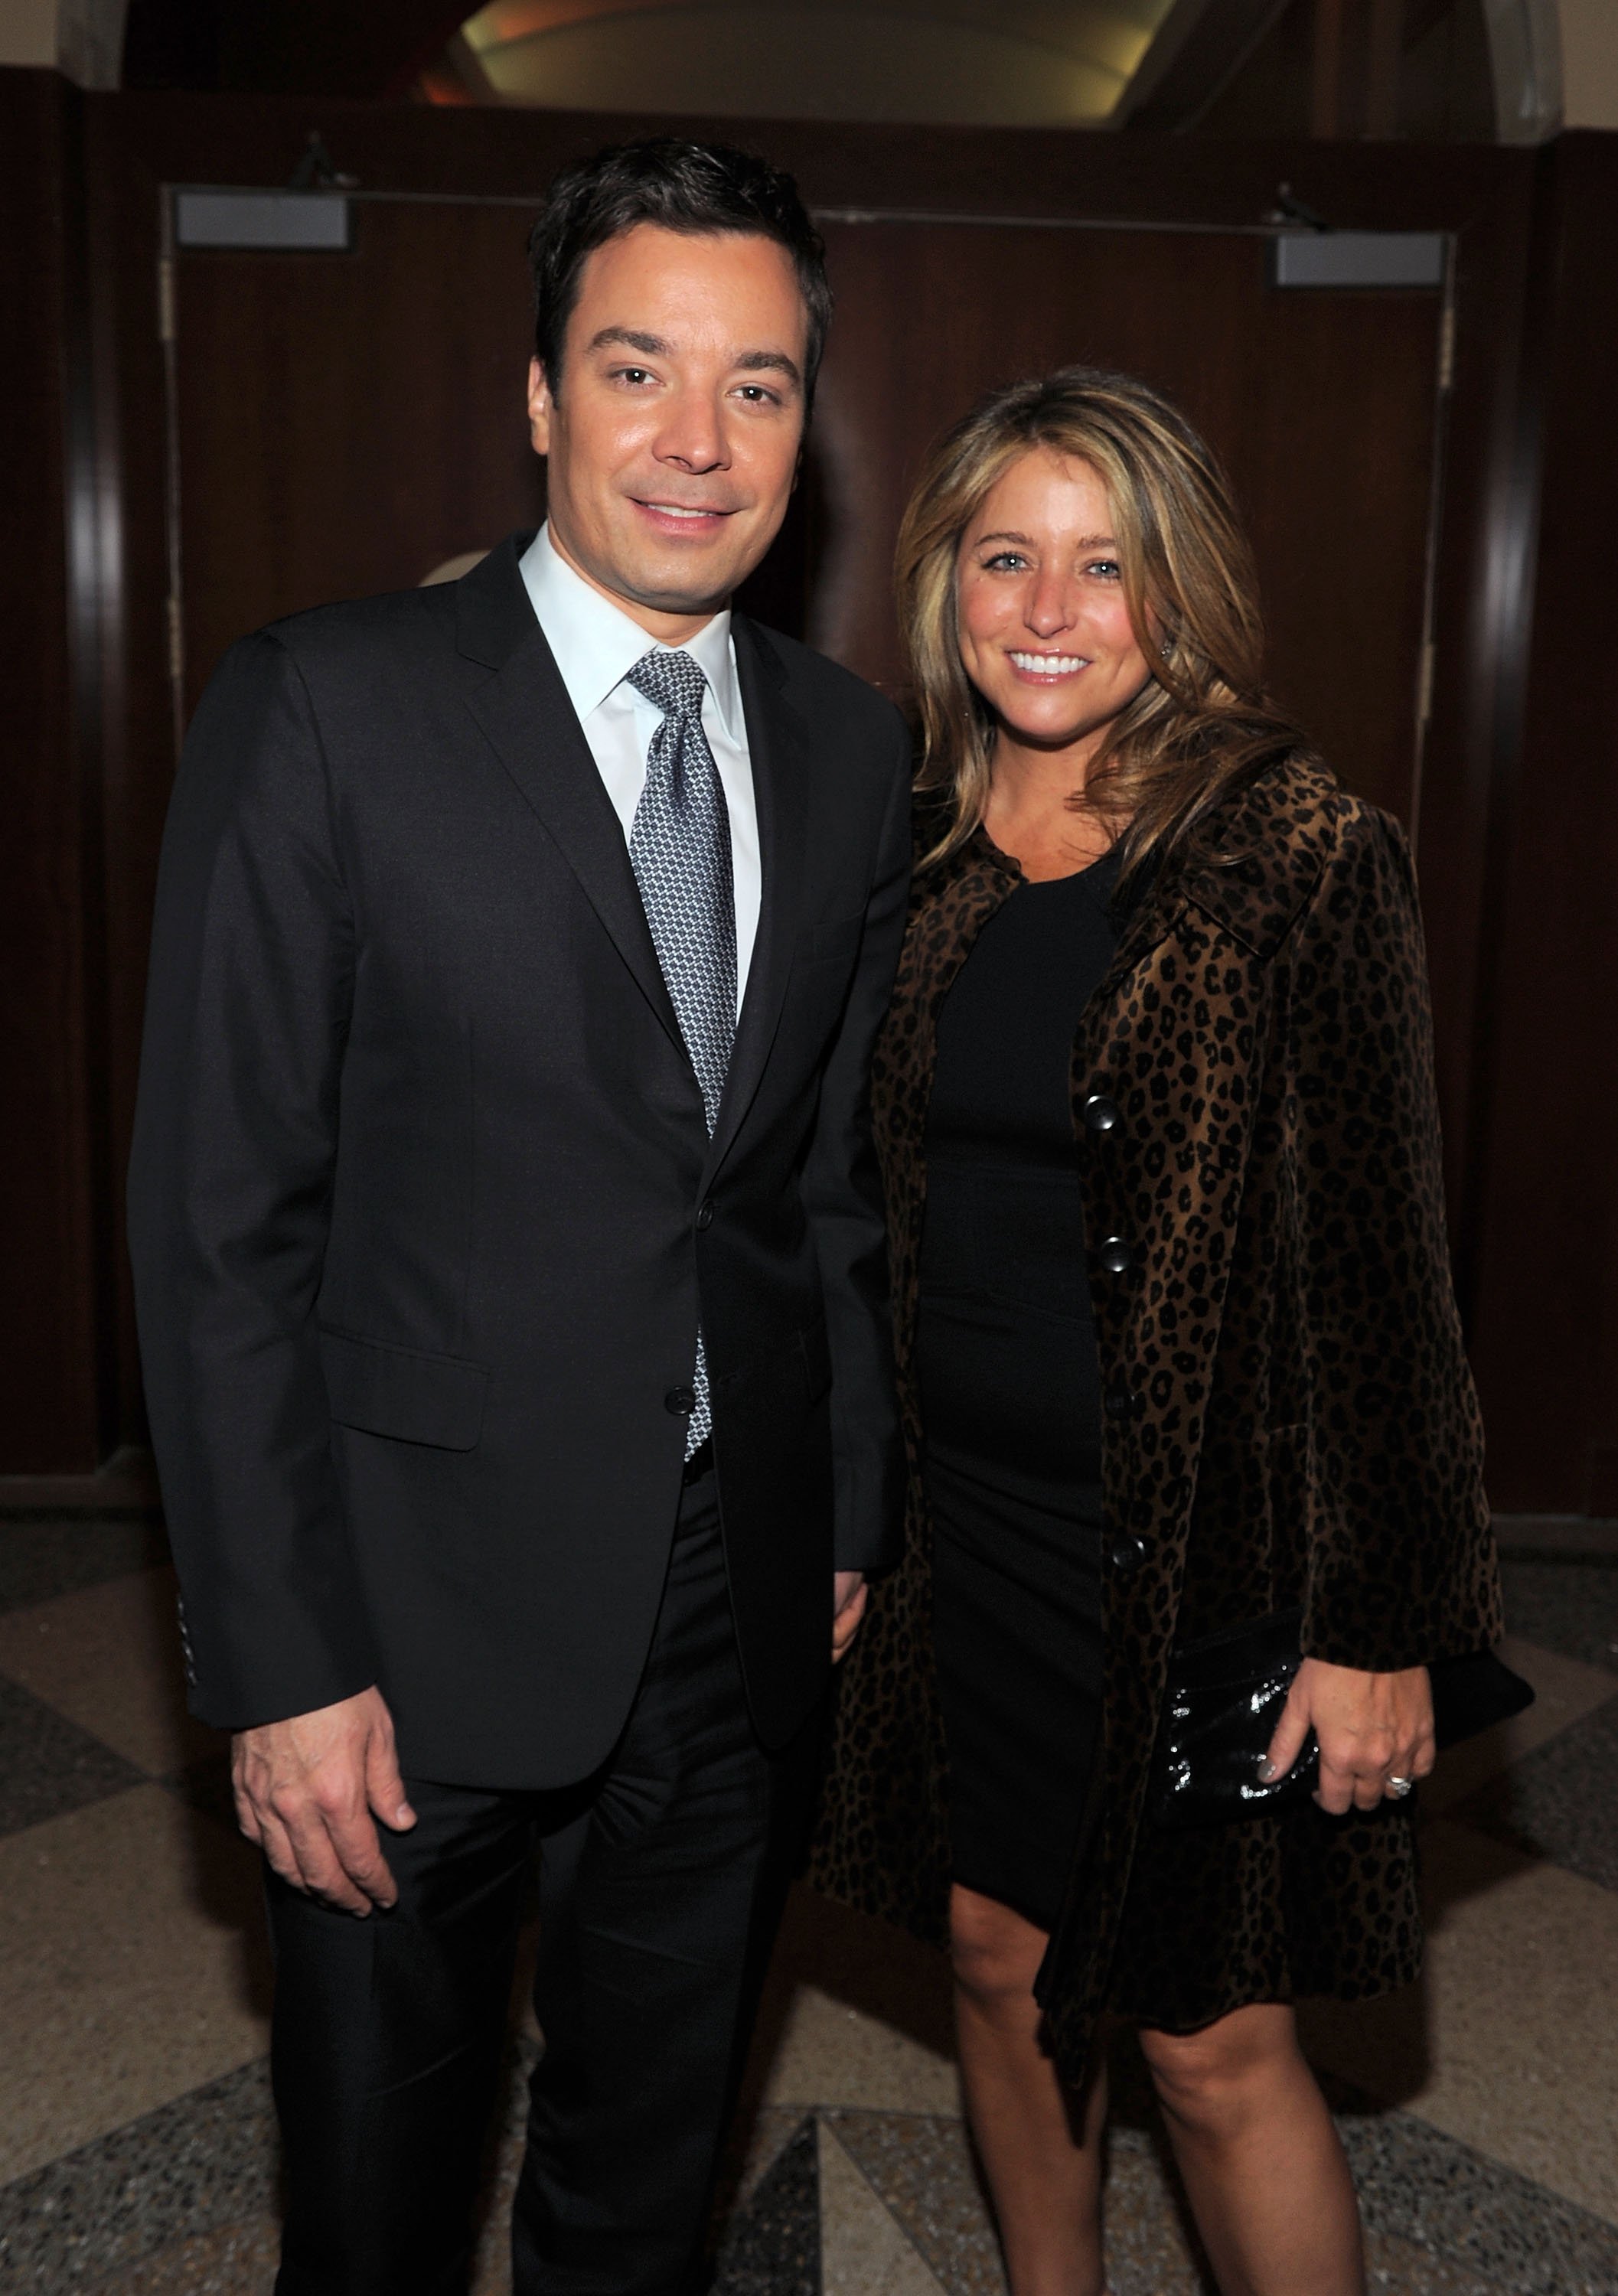 Jimmy Fallon and Nancy Juvonen attend Food Bank For New York City's Annual Can-Do Awards Gala at Pier Sixty at Chelsea Piers on April 7, 2011 in New York City. | Photo: GettyImages